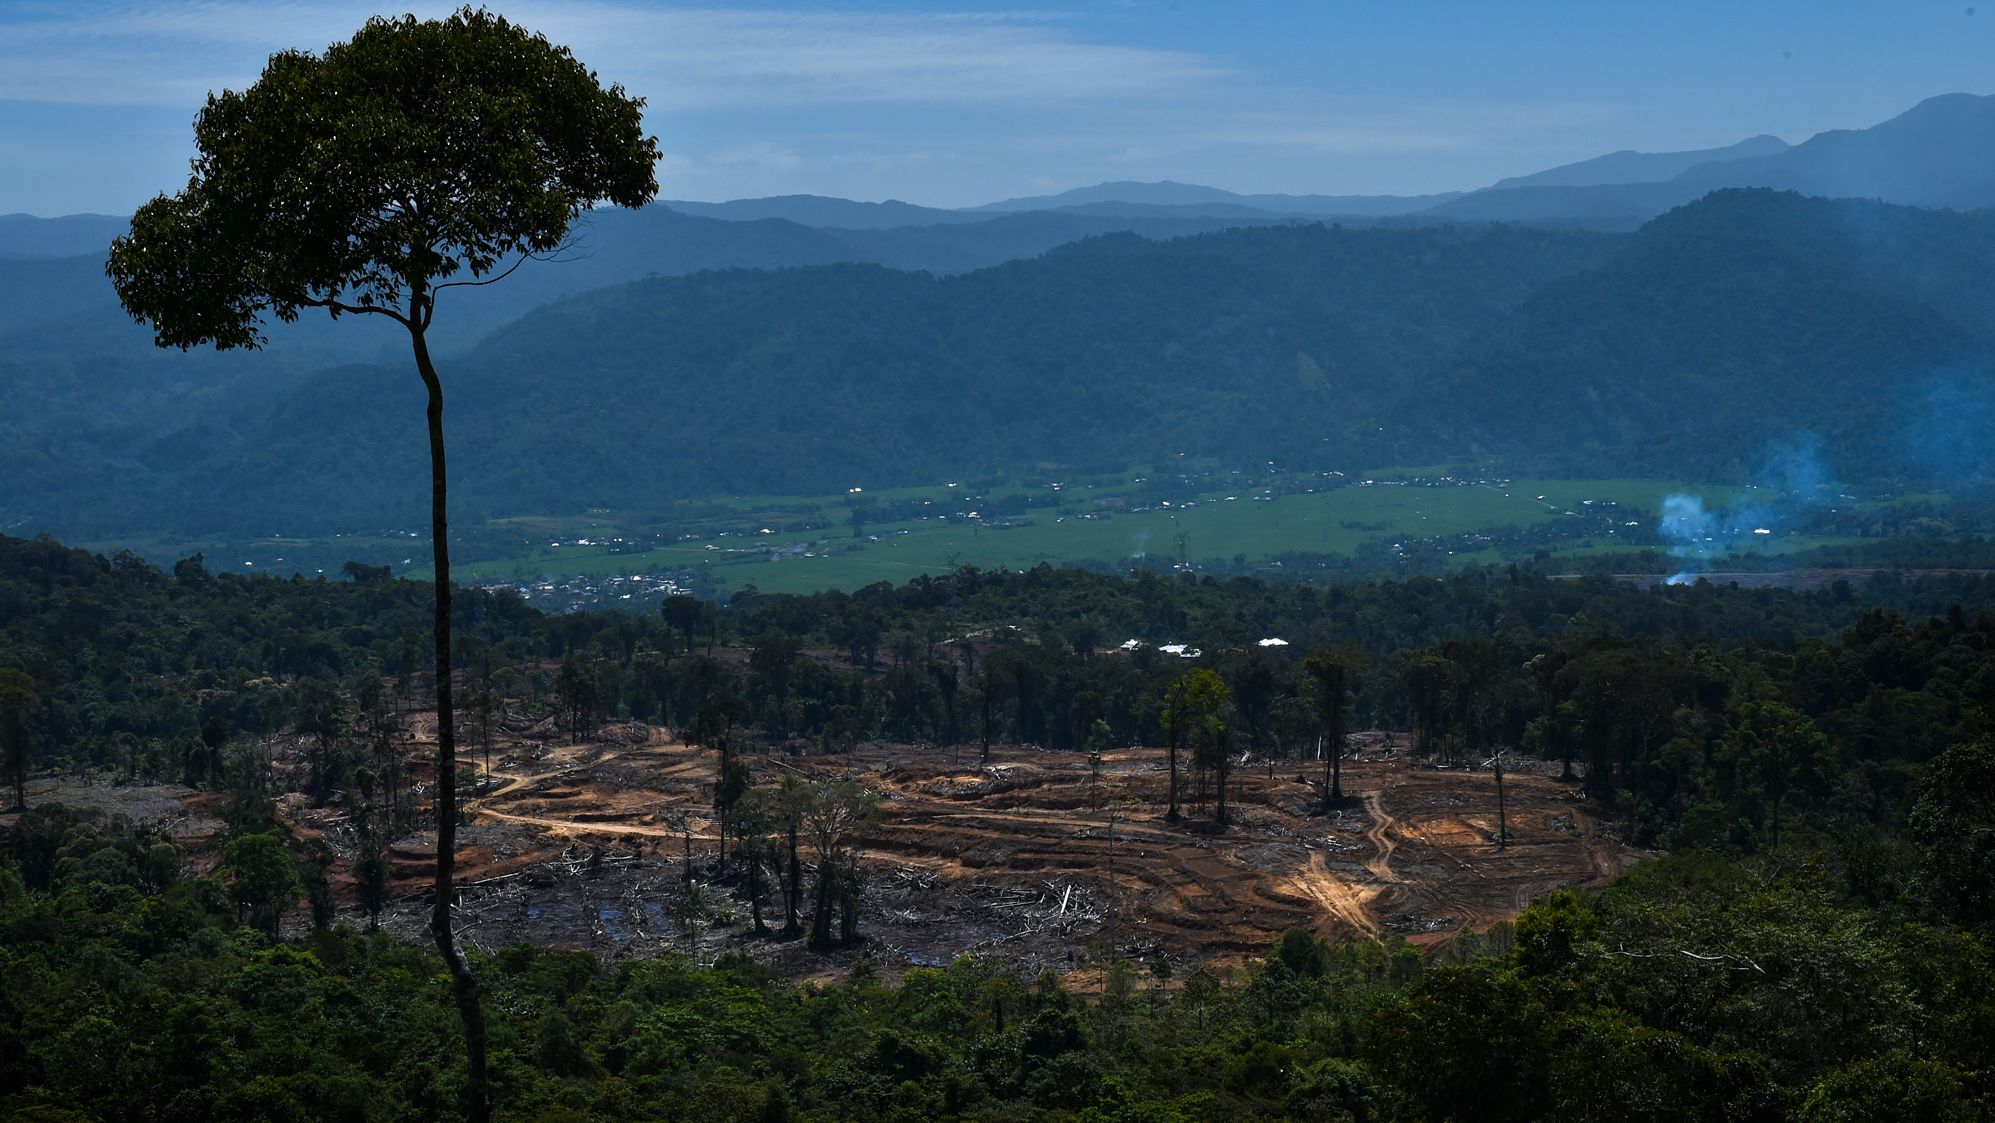 A land clearing area near protected forest in Tangse, Aceh province, in Indonesia on July 27, 2019.